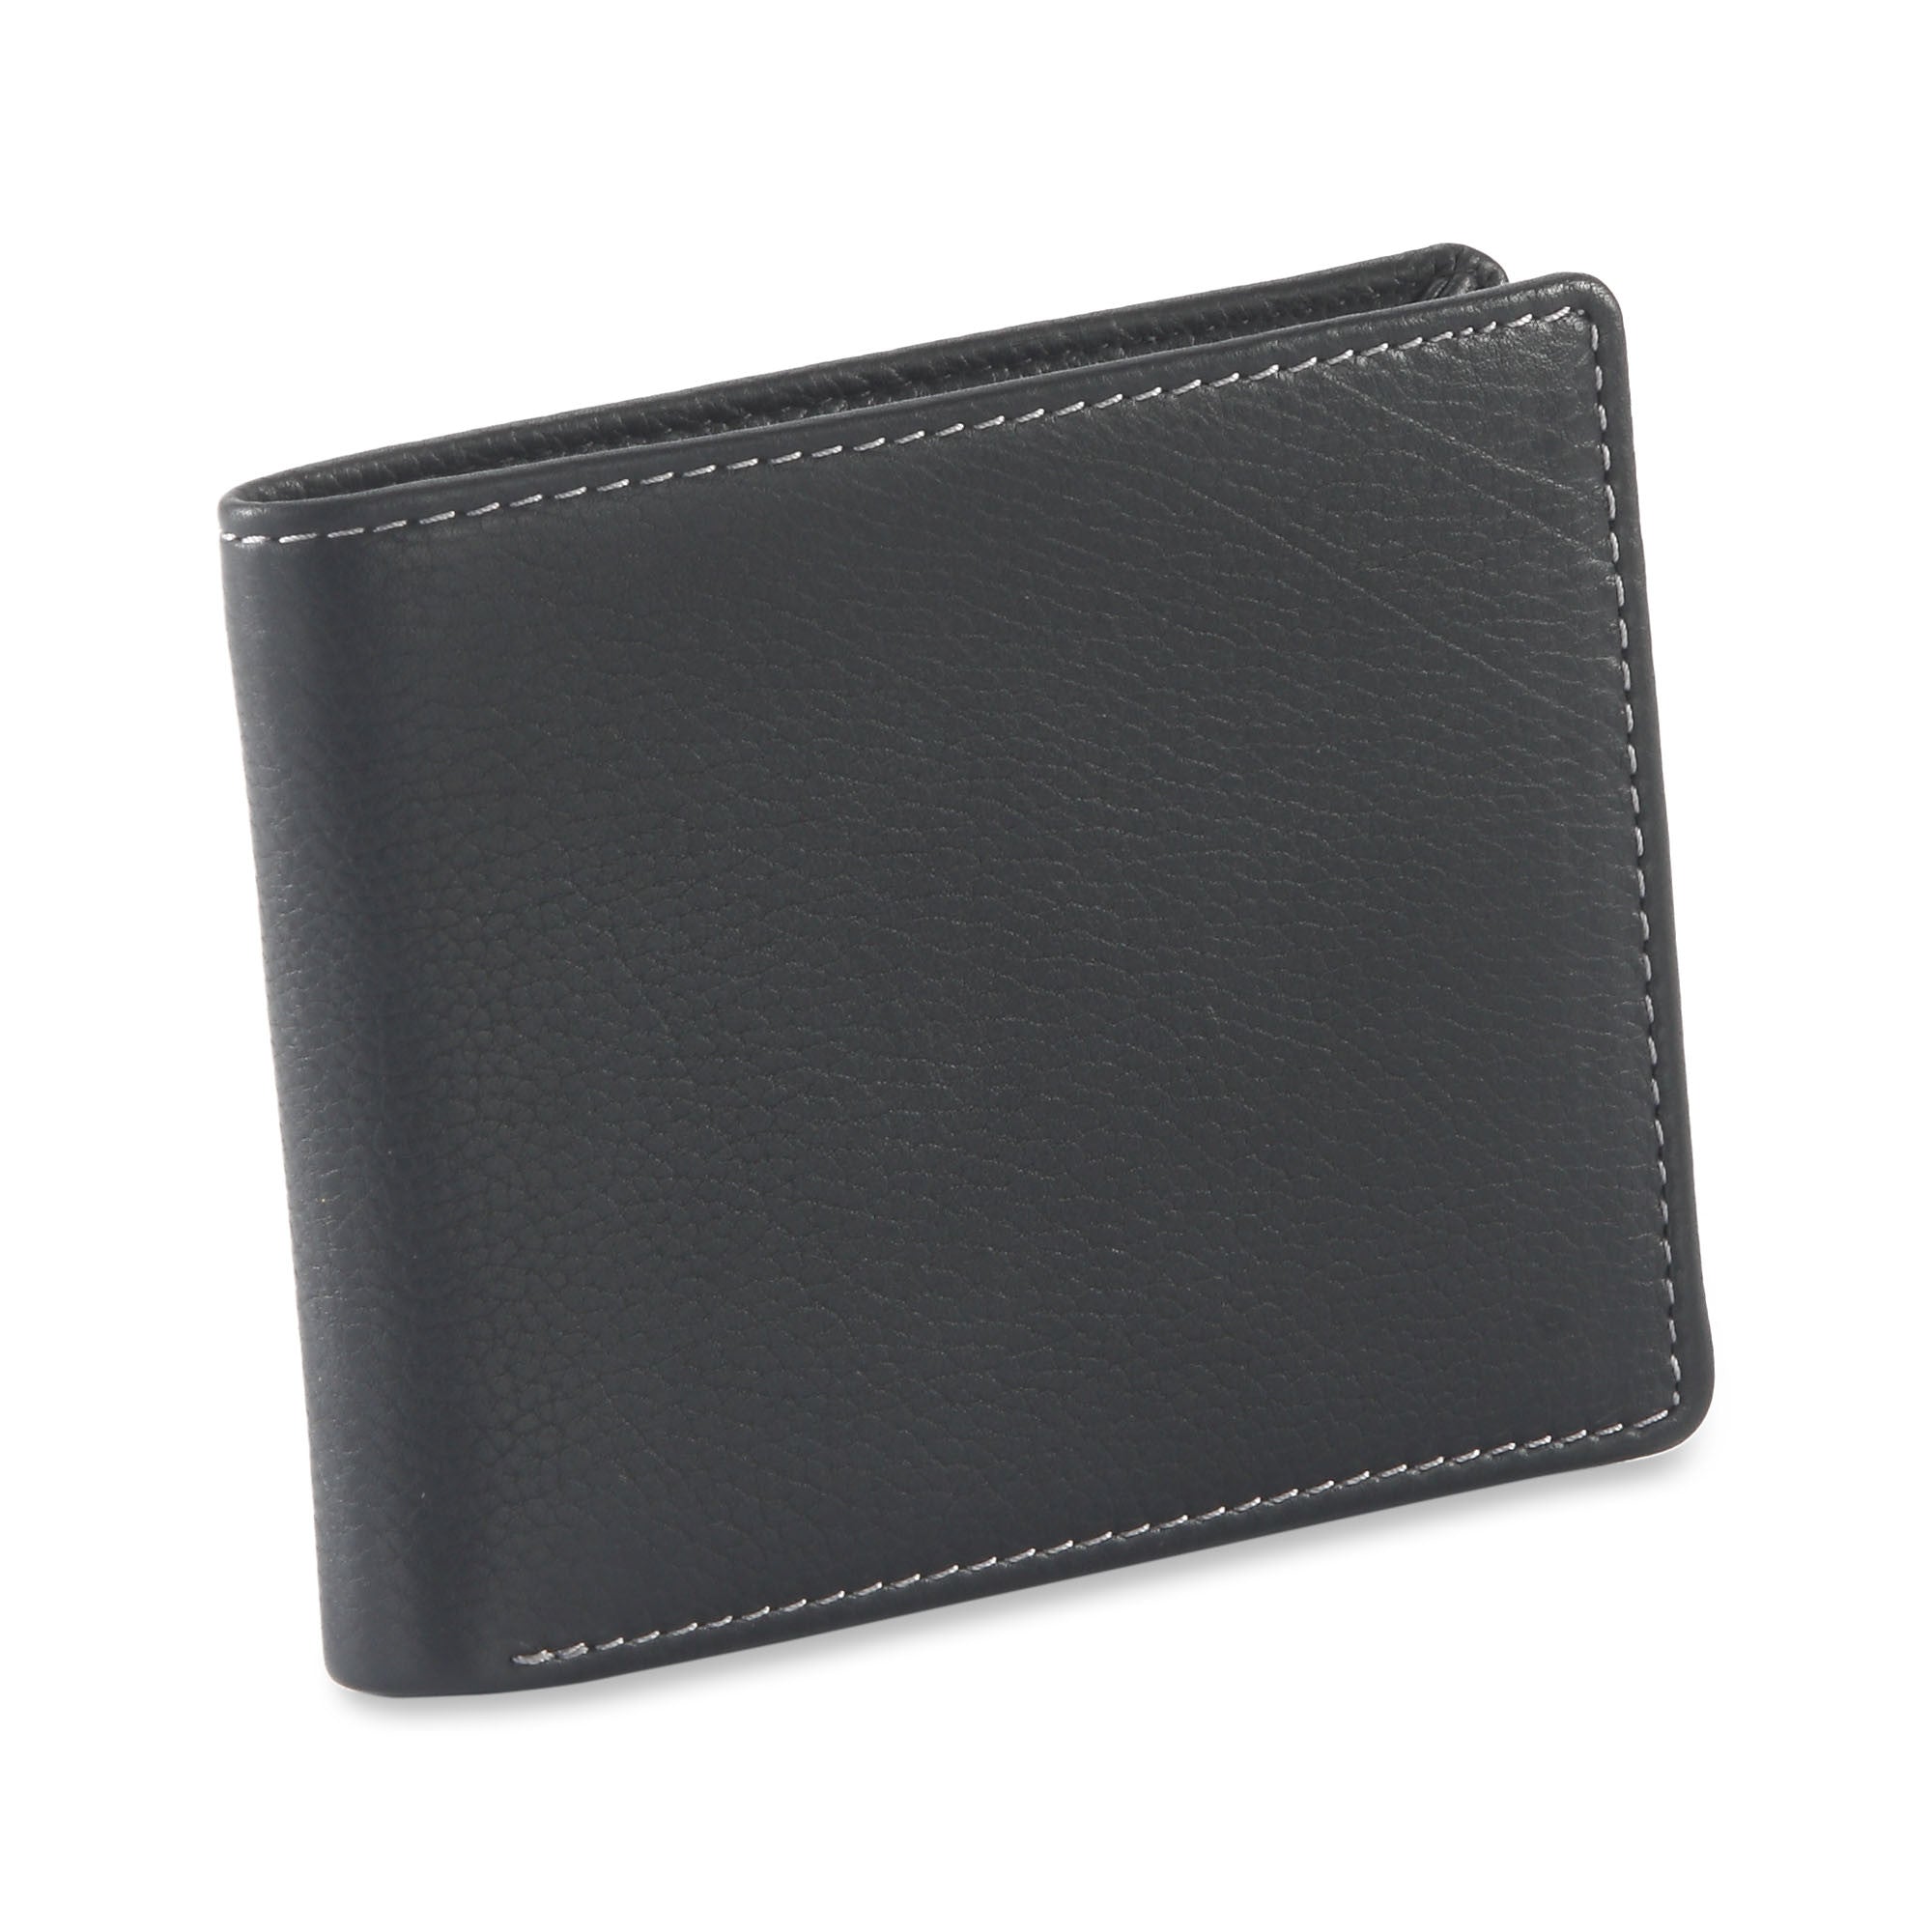 Black Bifold Leather Wallet with Side Flap | Style n Craft